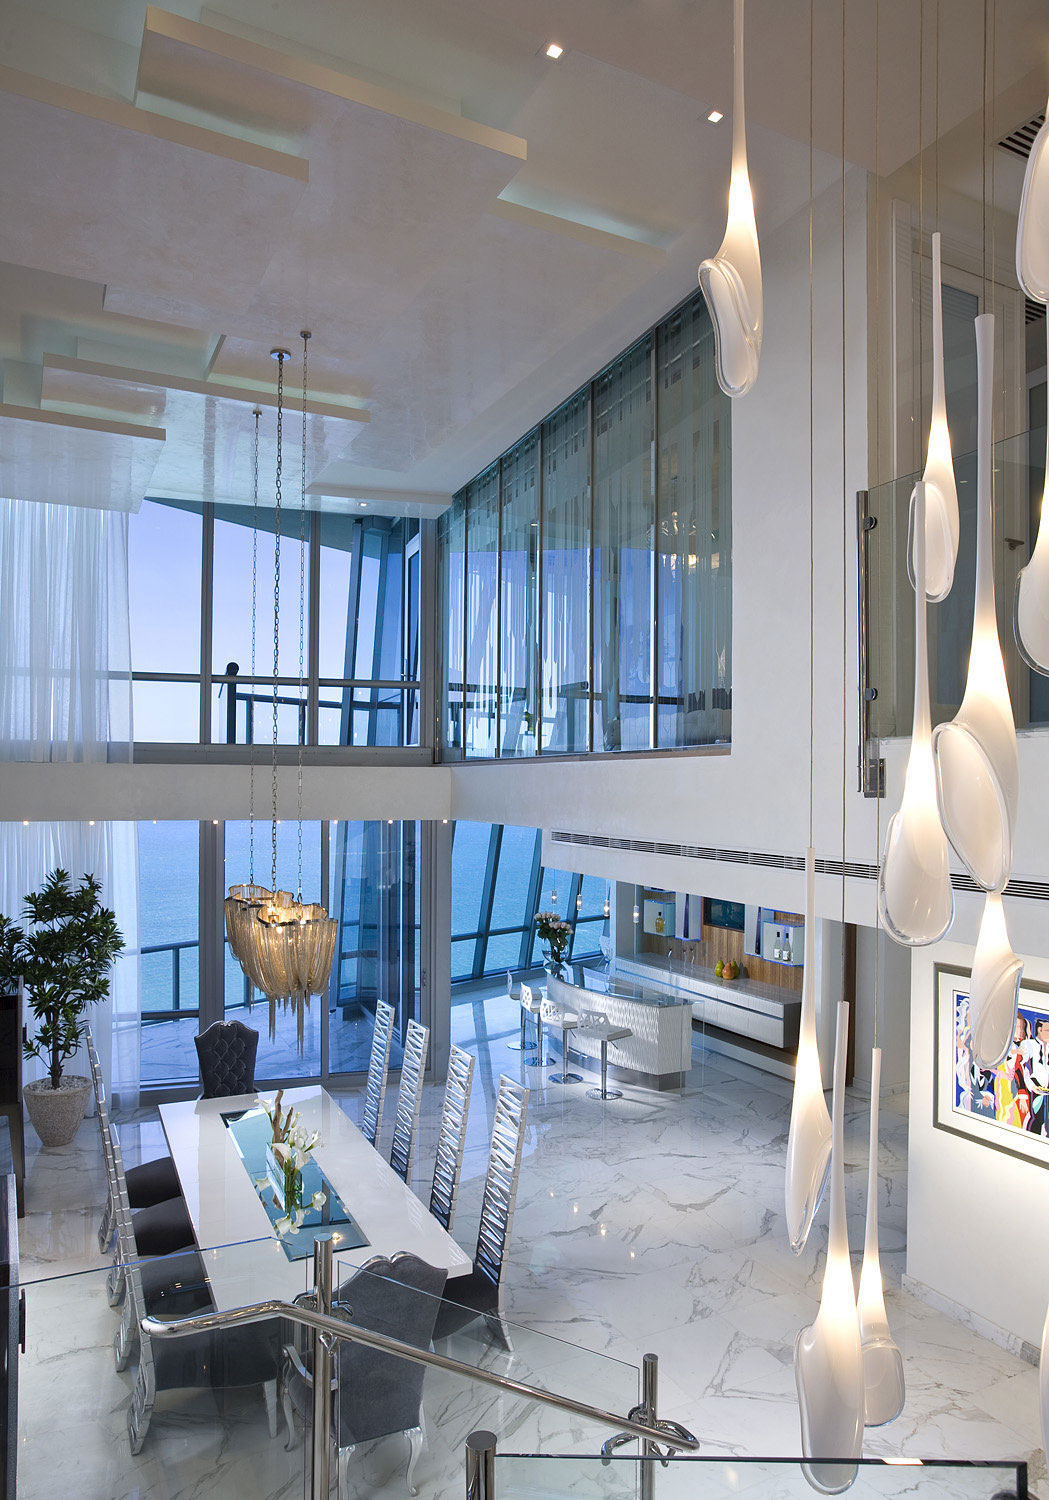 Elegant-ocean-penthouse-with-lots-of-hanging-lights-12 Elegant-ocean-penthouse with lots of hanging lights